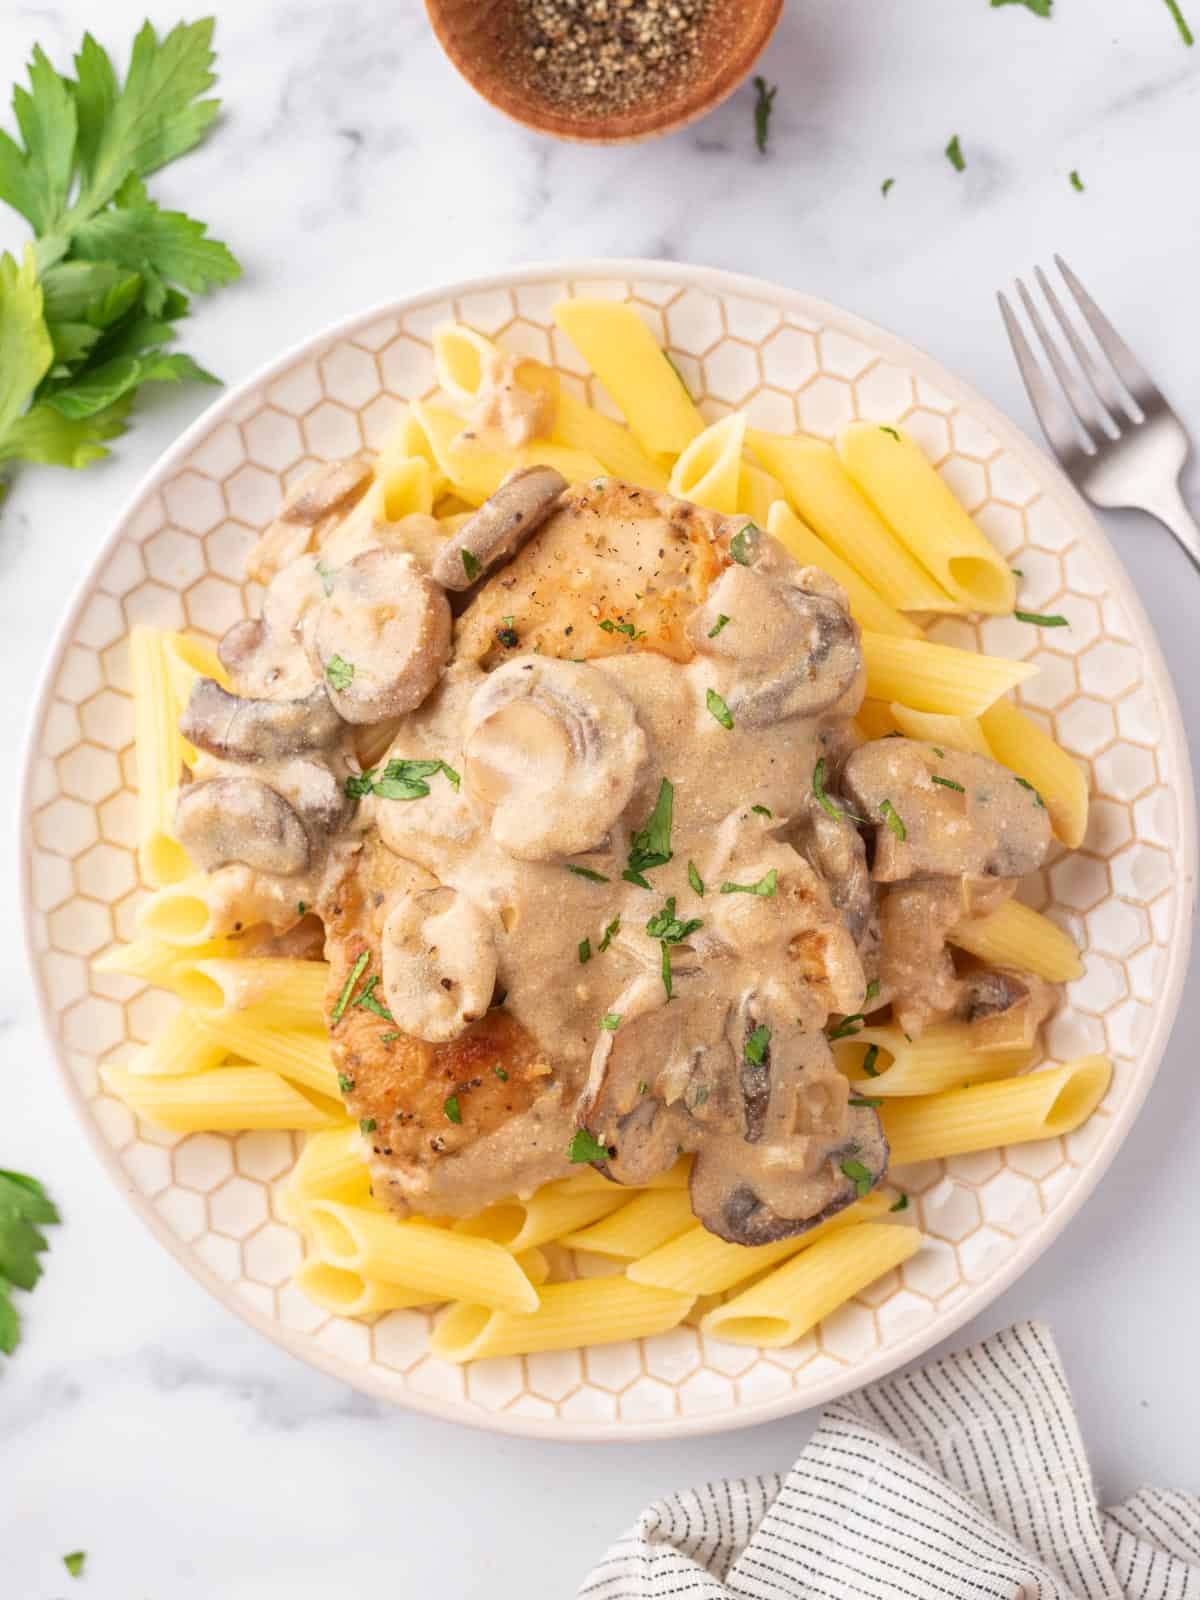 Creamy Chicken and Mushroom Stroganoff served over pasta in a plate